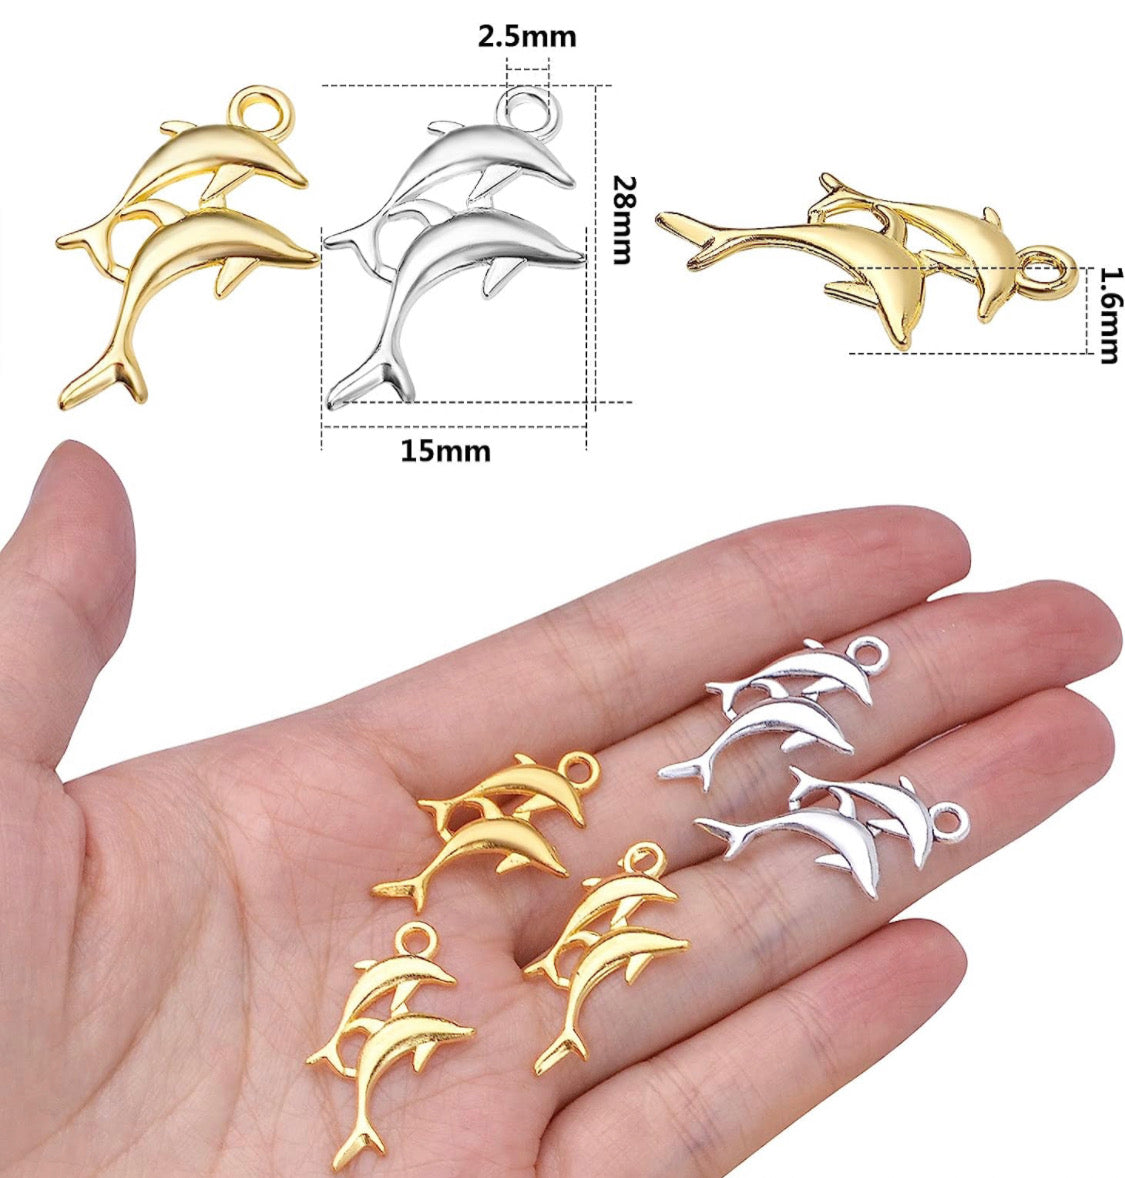 Silver and gold dolphin charms